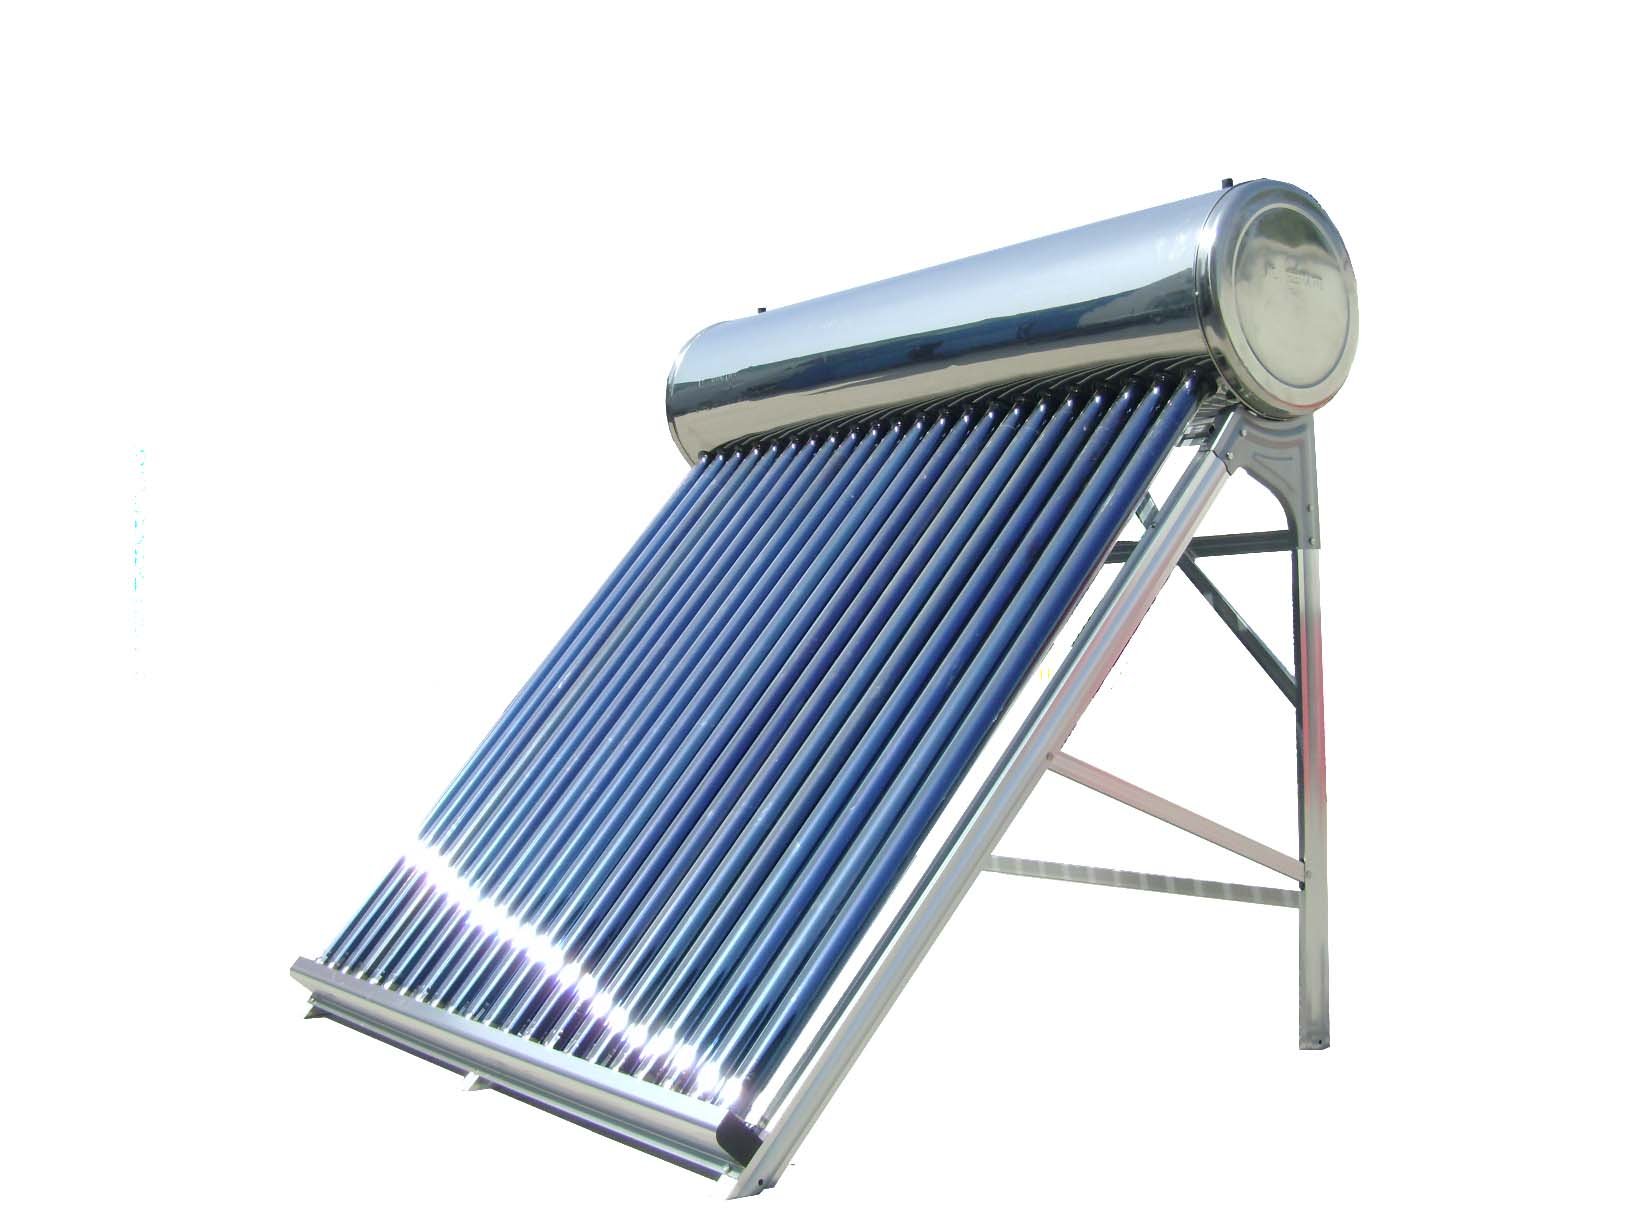 Solar Water Heater, Save Money and HotTub Albuquerque Plumbing, Heating & Cooling